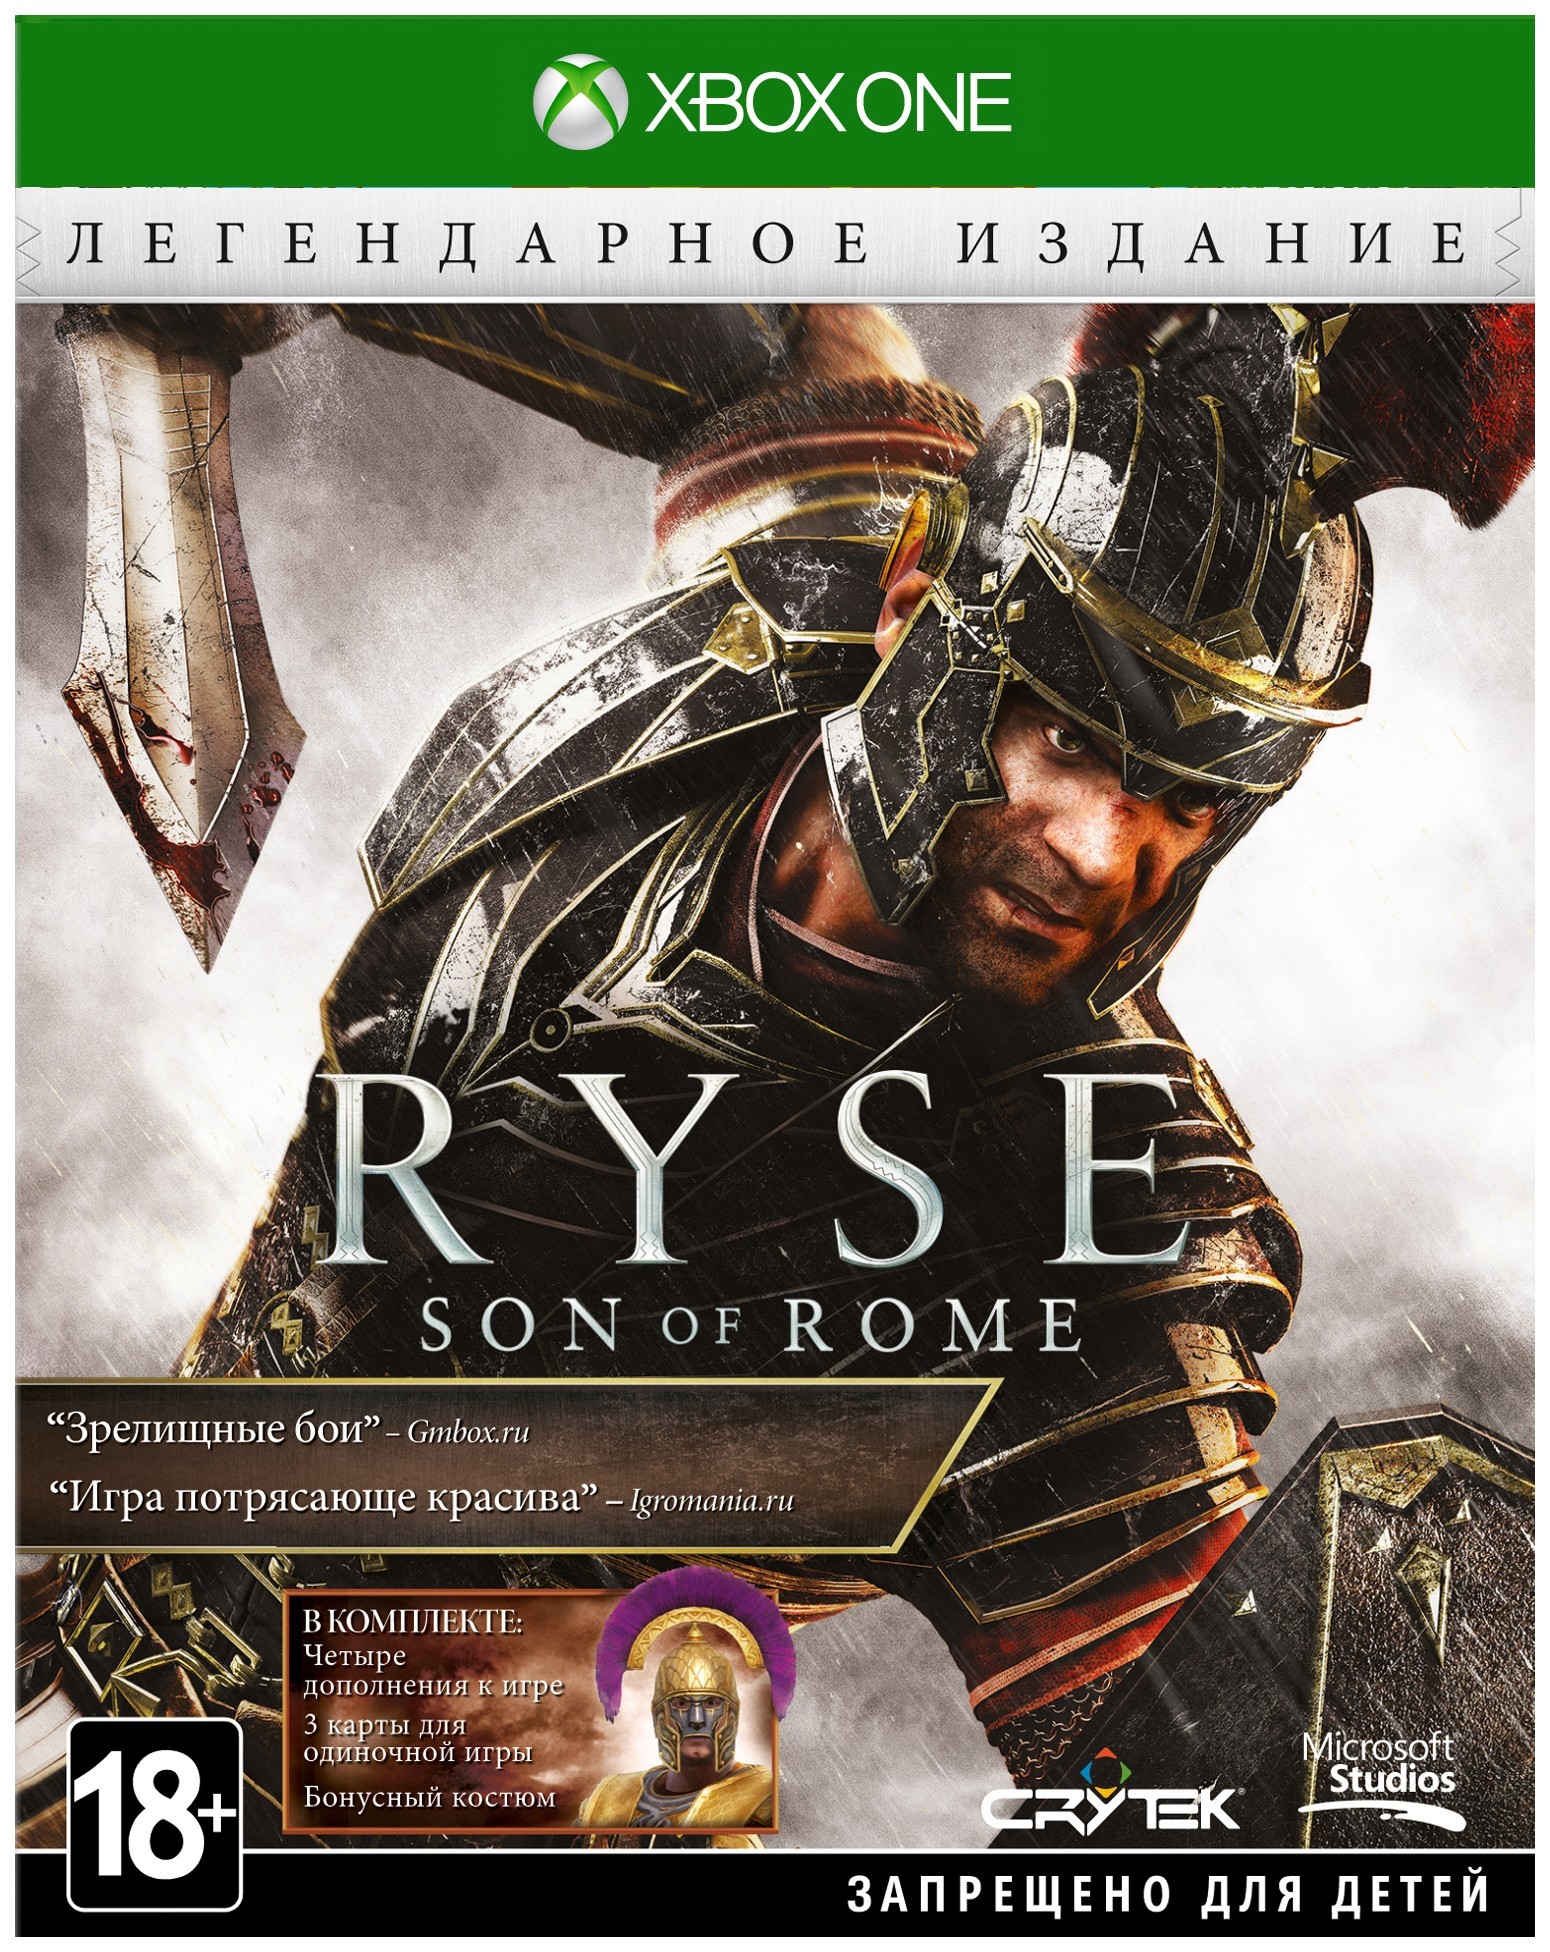 Ryse son of rome on steam фото 105